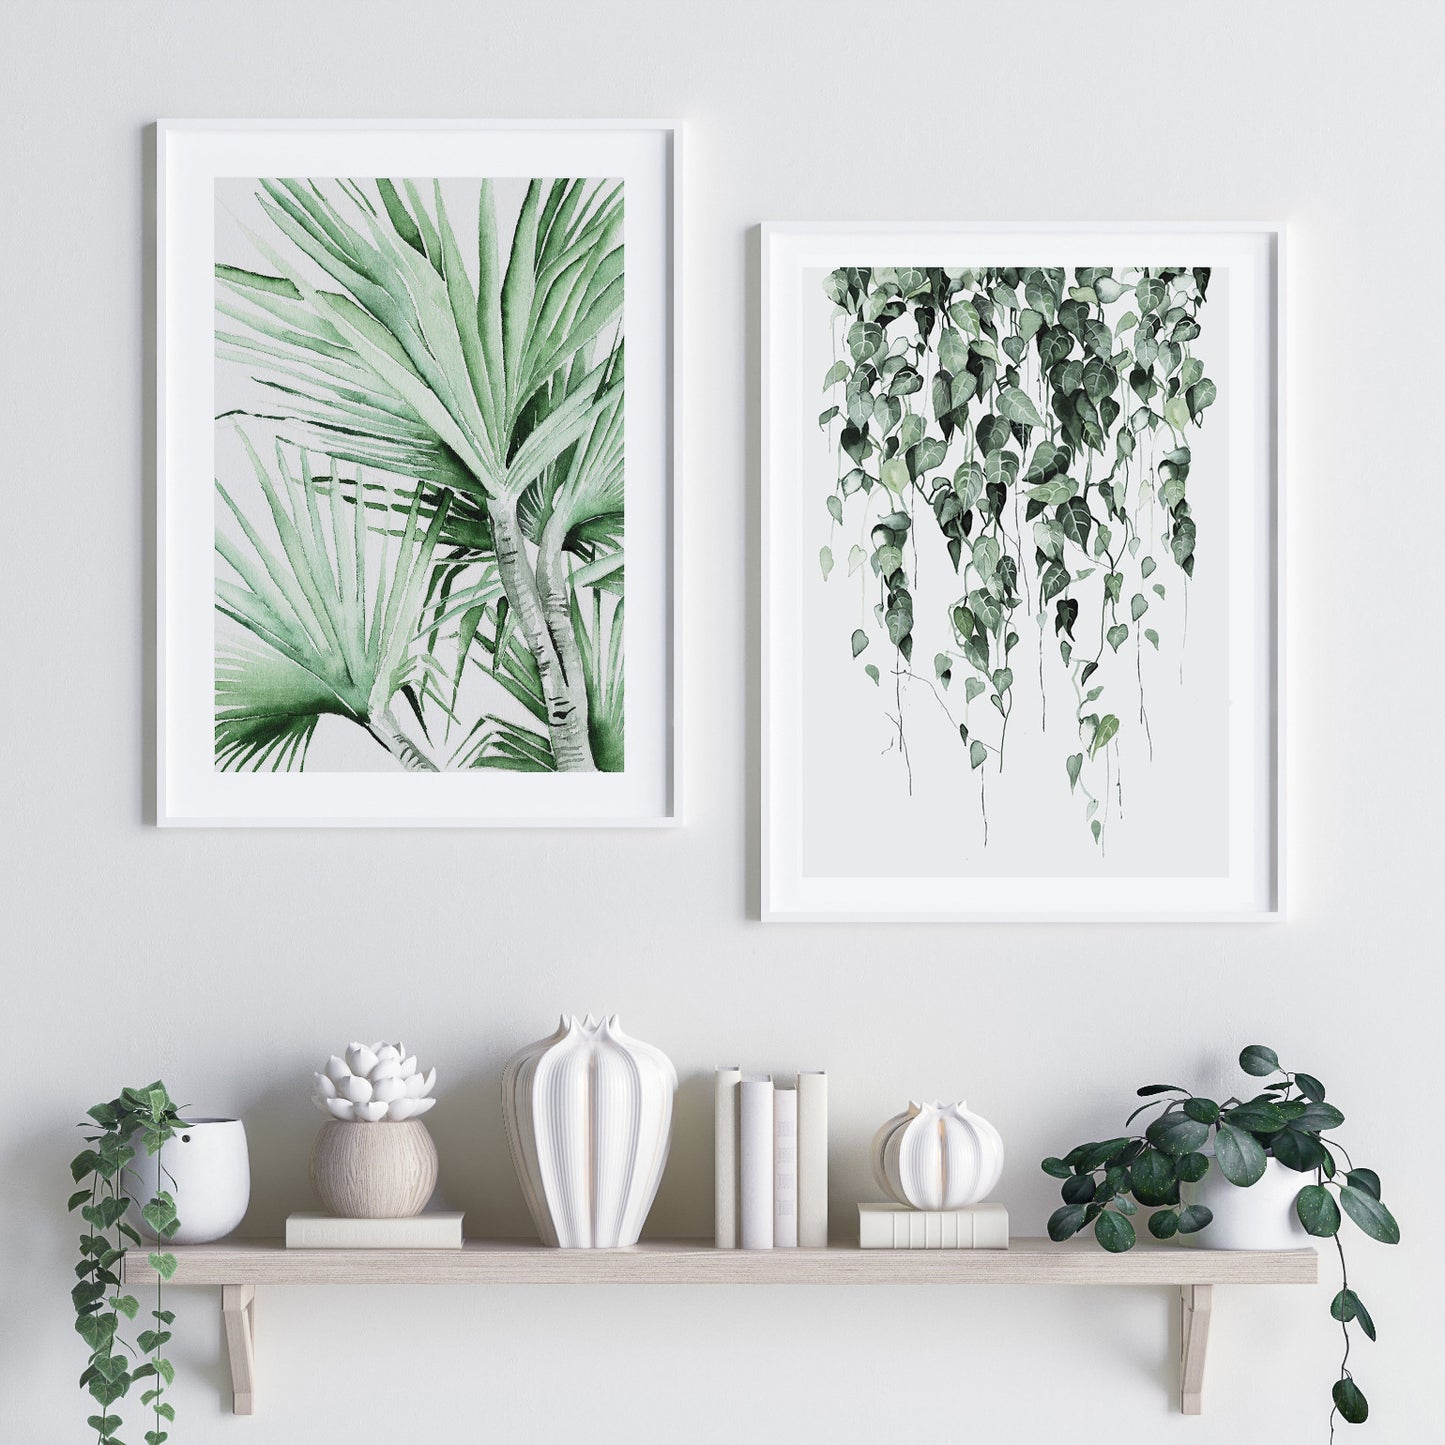 watercolour artwork showing heart shaped leaves dangling from the top. Called "Falling Hearts" beside a painting of a palm tree, below the pictures is a floating shelf with a variety of vessels and pot plants sitting on it